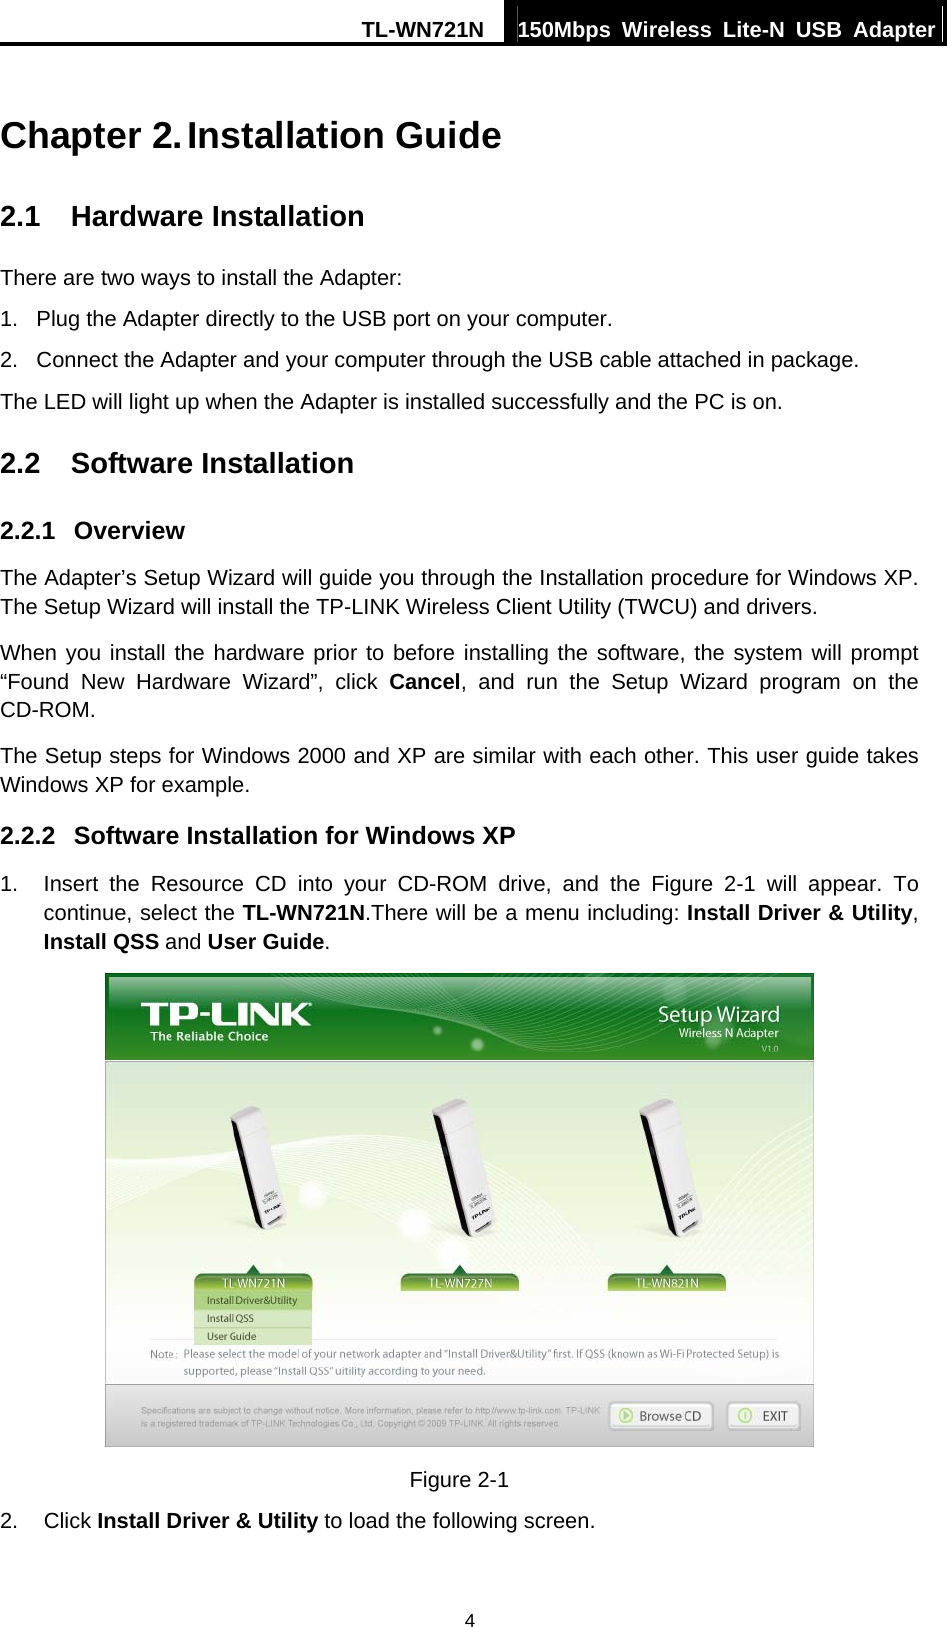 TL-WN721N  150Mbps Wireless Lite-N USB Adapter   4Chapter 2. Installation Guide 2.1  Hardware Installation There are two ways to install the Adapter: 1.  Plug the Adapter directly to the USB port on your computer. 2.  Connect the Adapter and your computer through the USB cable attached in package.   The LED will light up when the Adapter is installed successfully and the PC is on. 2.2  Software Installation 2.2.1  Overview The Adapter’s Setup Wizard will guide you through the Installation procedure for Windows XP. The Setup Wizard will install the TP-LINK Wireless Client Utility (TWCU) and drivers. When you install the hardware prior to before installing the software, the system will prompt “Found New Hardware Wizard”, click Cancel, and run the Setup Wizard program on the CD-ROM.  The Setup steps for Windows 2000 and XP are similar with each other. This user guide takes Windows XP for example. 2.2.2  Software Installation for Windows XP 1.  Insert the Resource CD into your CD-ROM drive, and the Figure 2-1 will appear. To continue, select the TL-WN721N.There will be a menu including: Install Driver &amp; Utility, Install QSS and User Guide.  Figure 2-1 2. Click Install Driver &amp; Utility to load the following screen. 